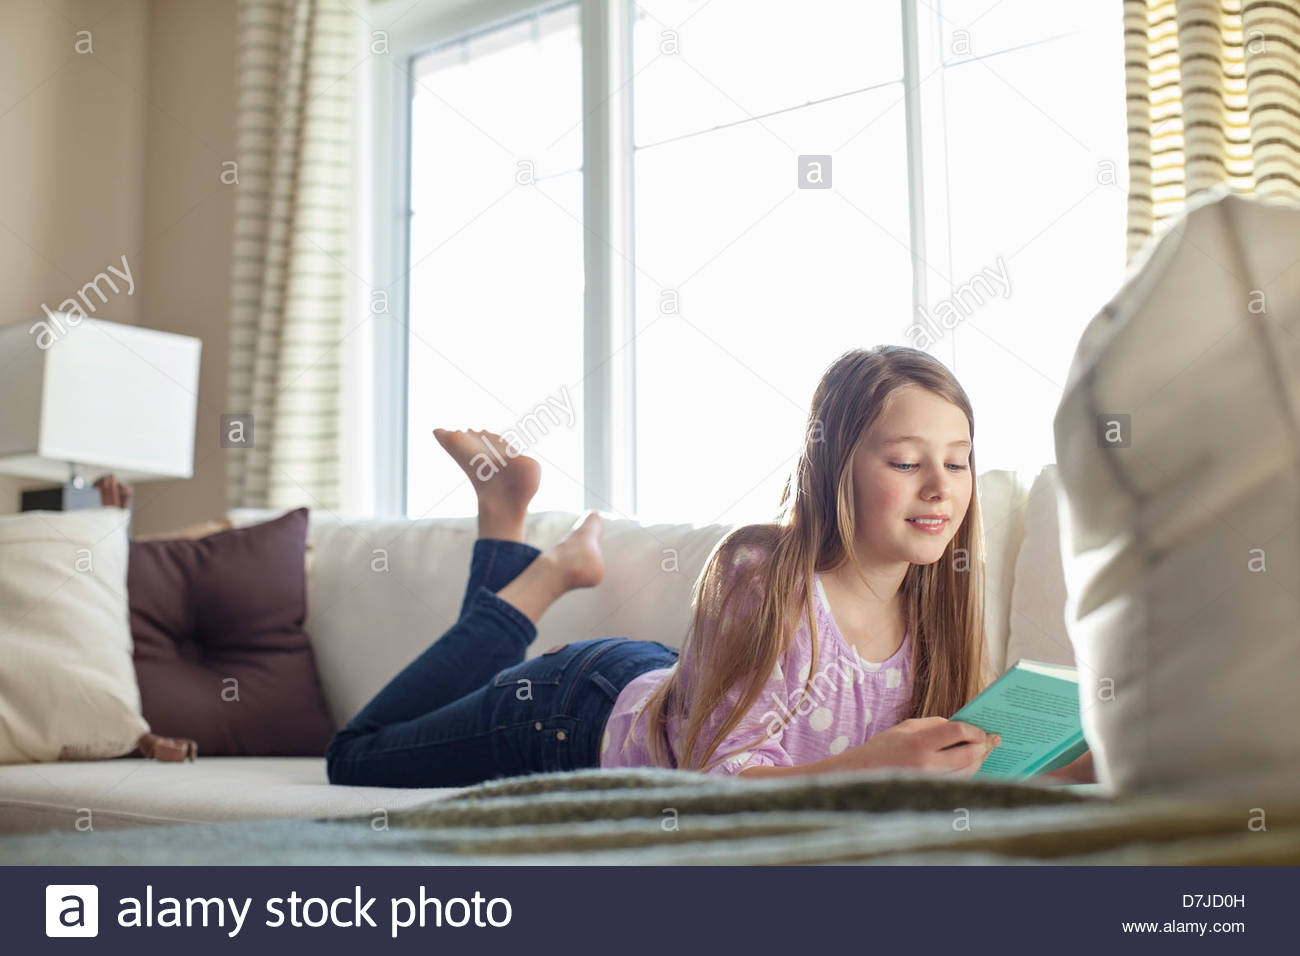 Young girl reading book lying on sofa Stock Photo